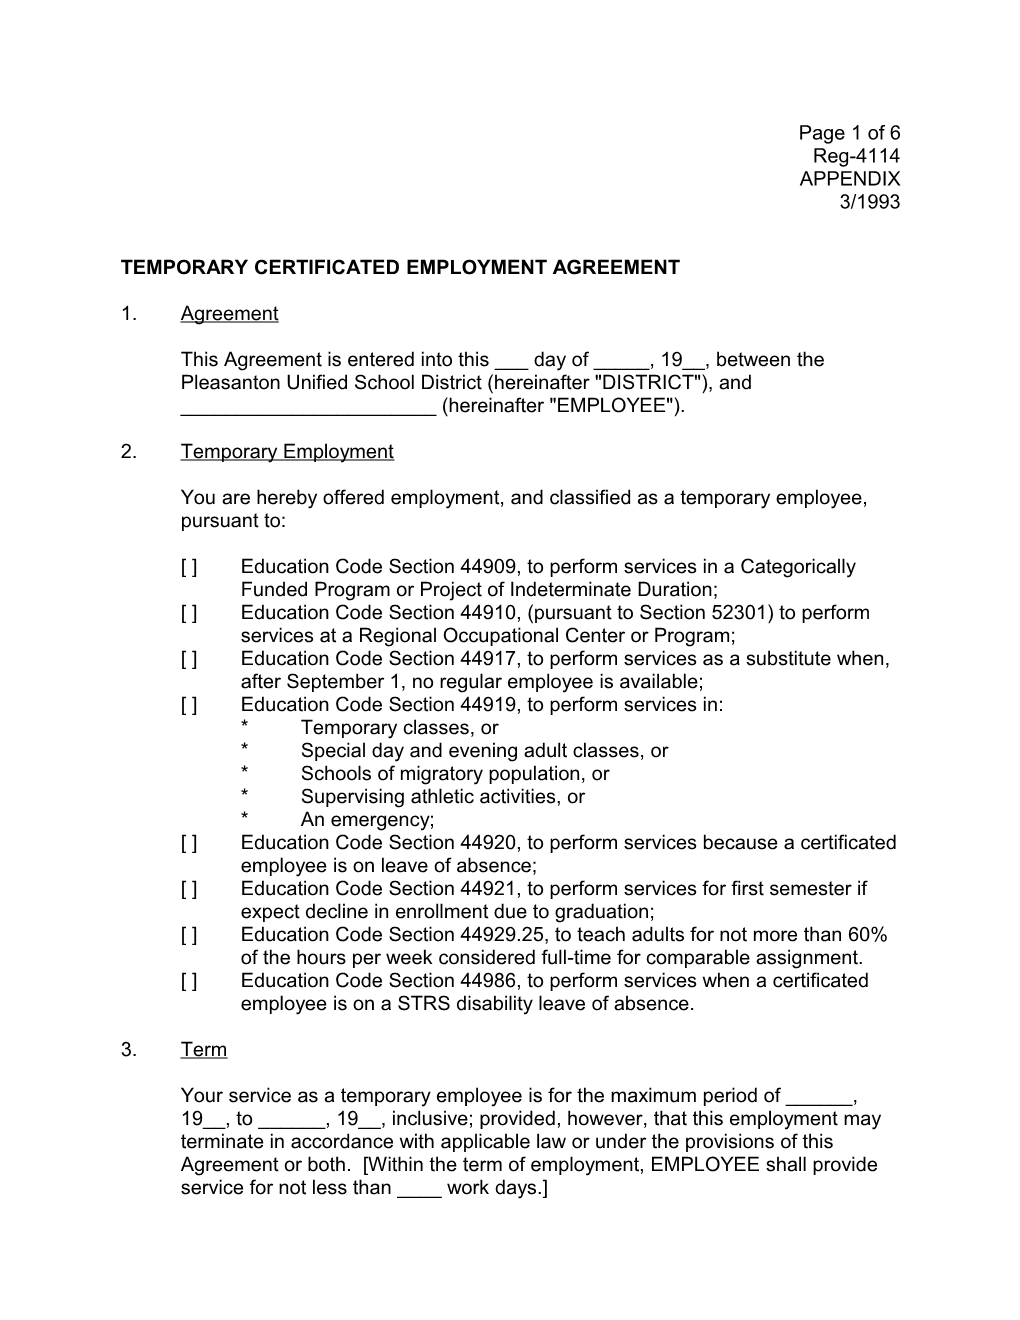 Temporary Certificated Employment Agreement